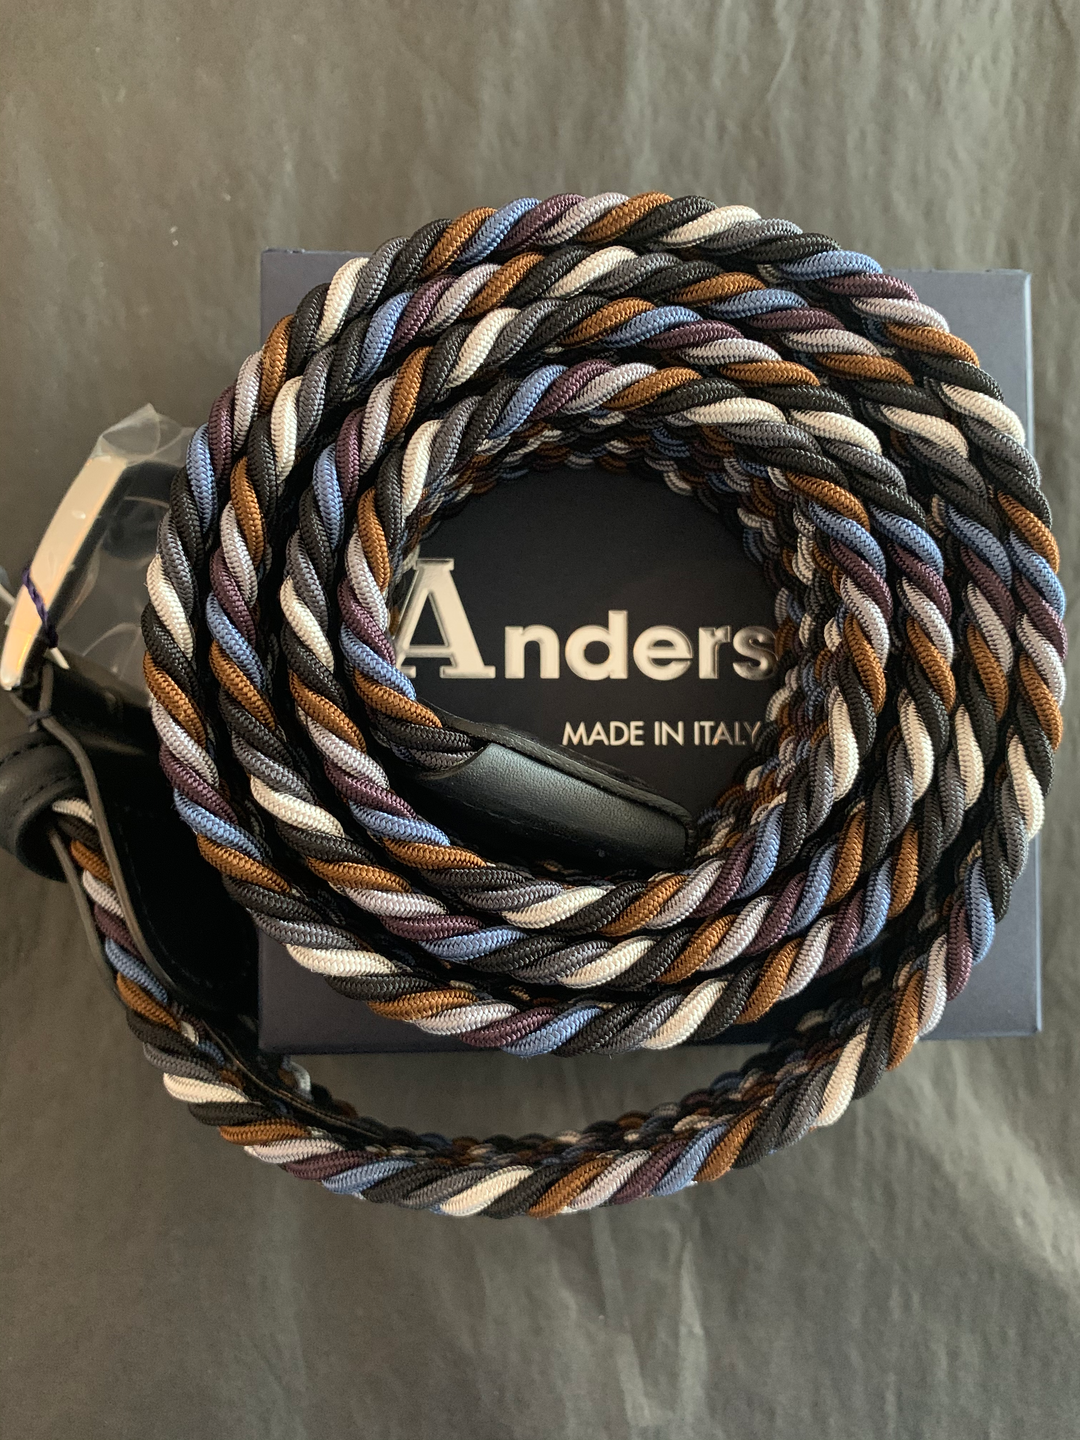 Anderson's Multi-Colour Stretch Woven Belt in Blue/Grey/Purple/Brown | Buster McGee Daylesford